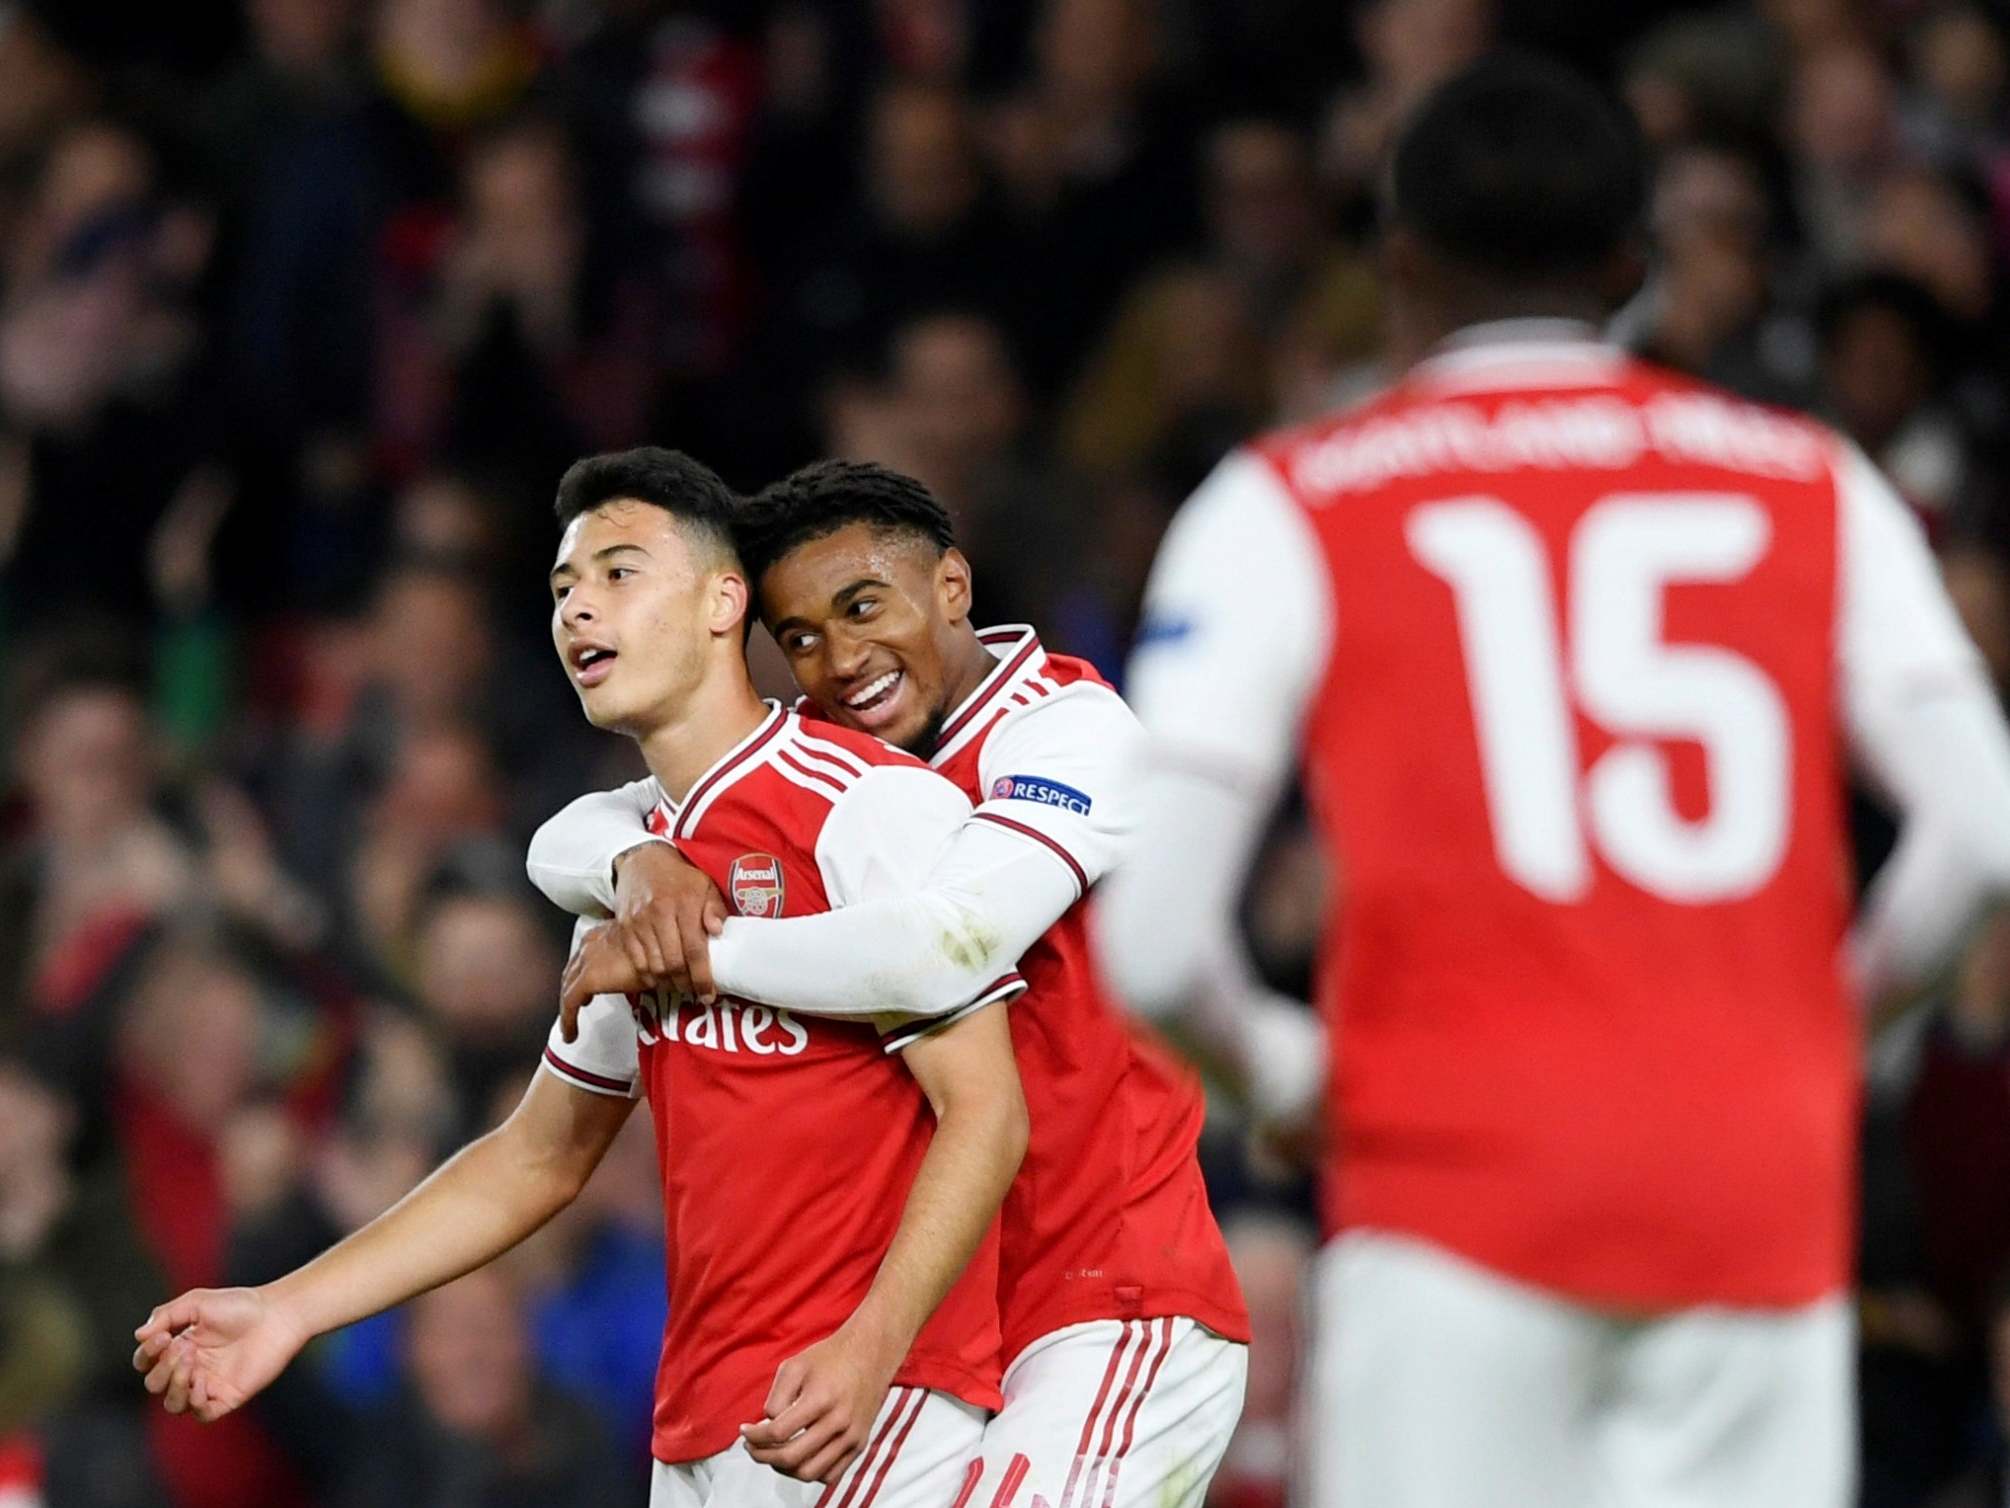 Arsenal vs Standard Liege: Gabriel Martinelli dazzles in Gunners rout - 5 things we learned